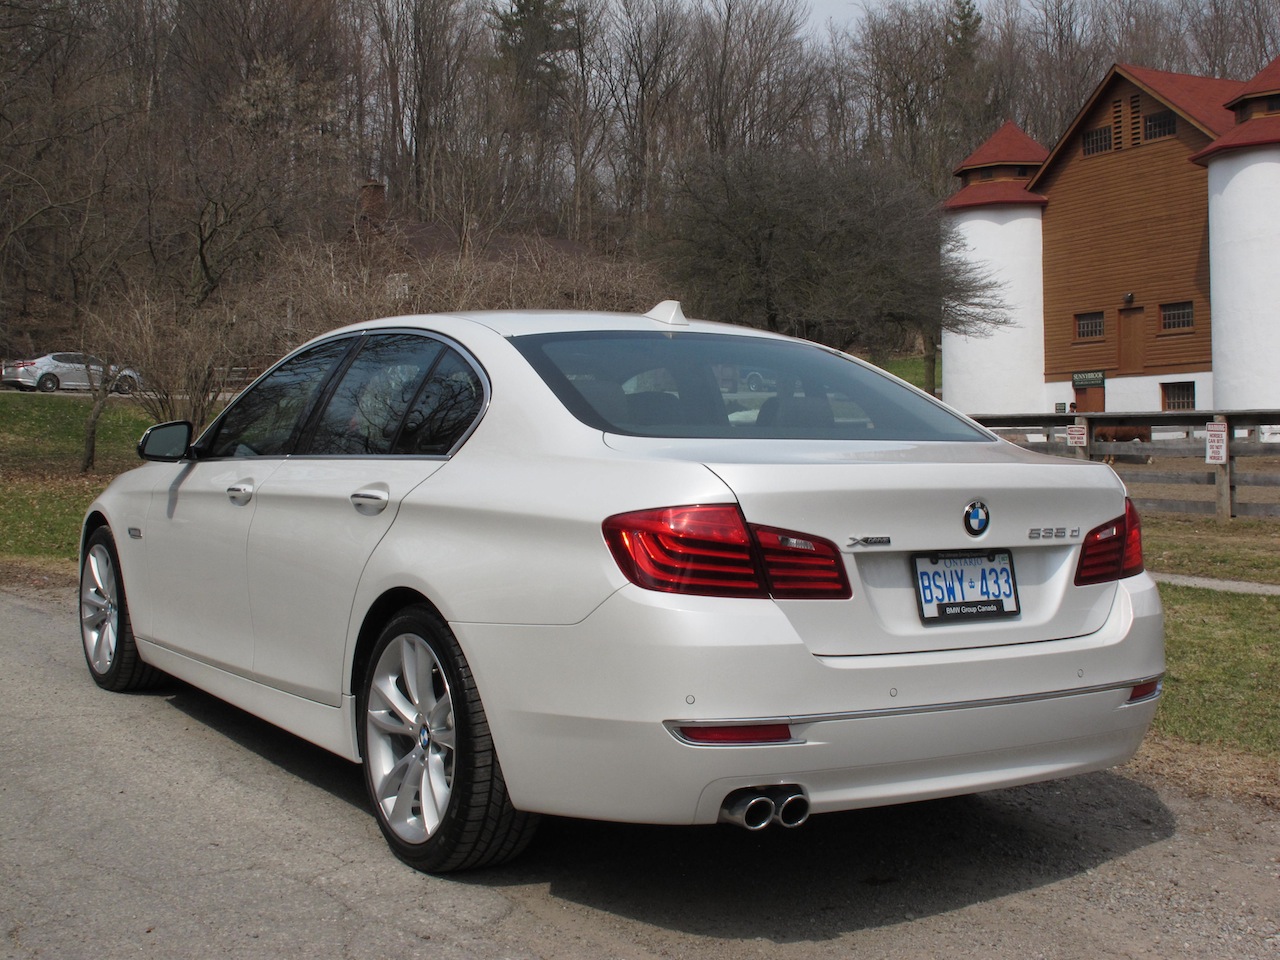 2014 BMW 535d xDrive Review - Cars, Photos, Test Drives, and Reviews |  Canadian Auto Review